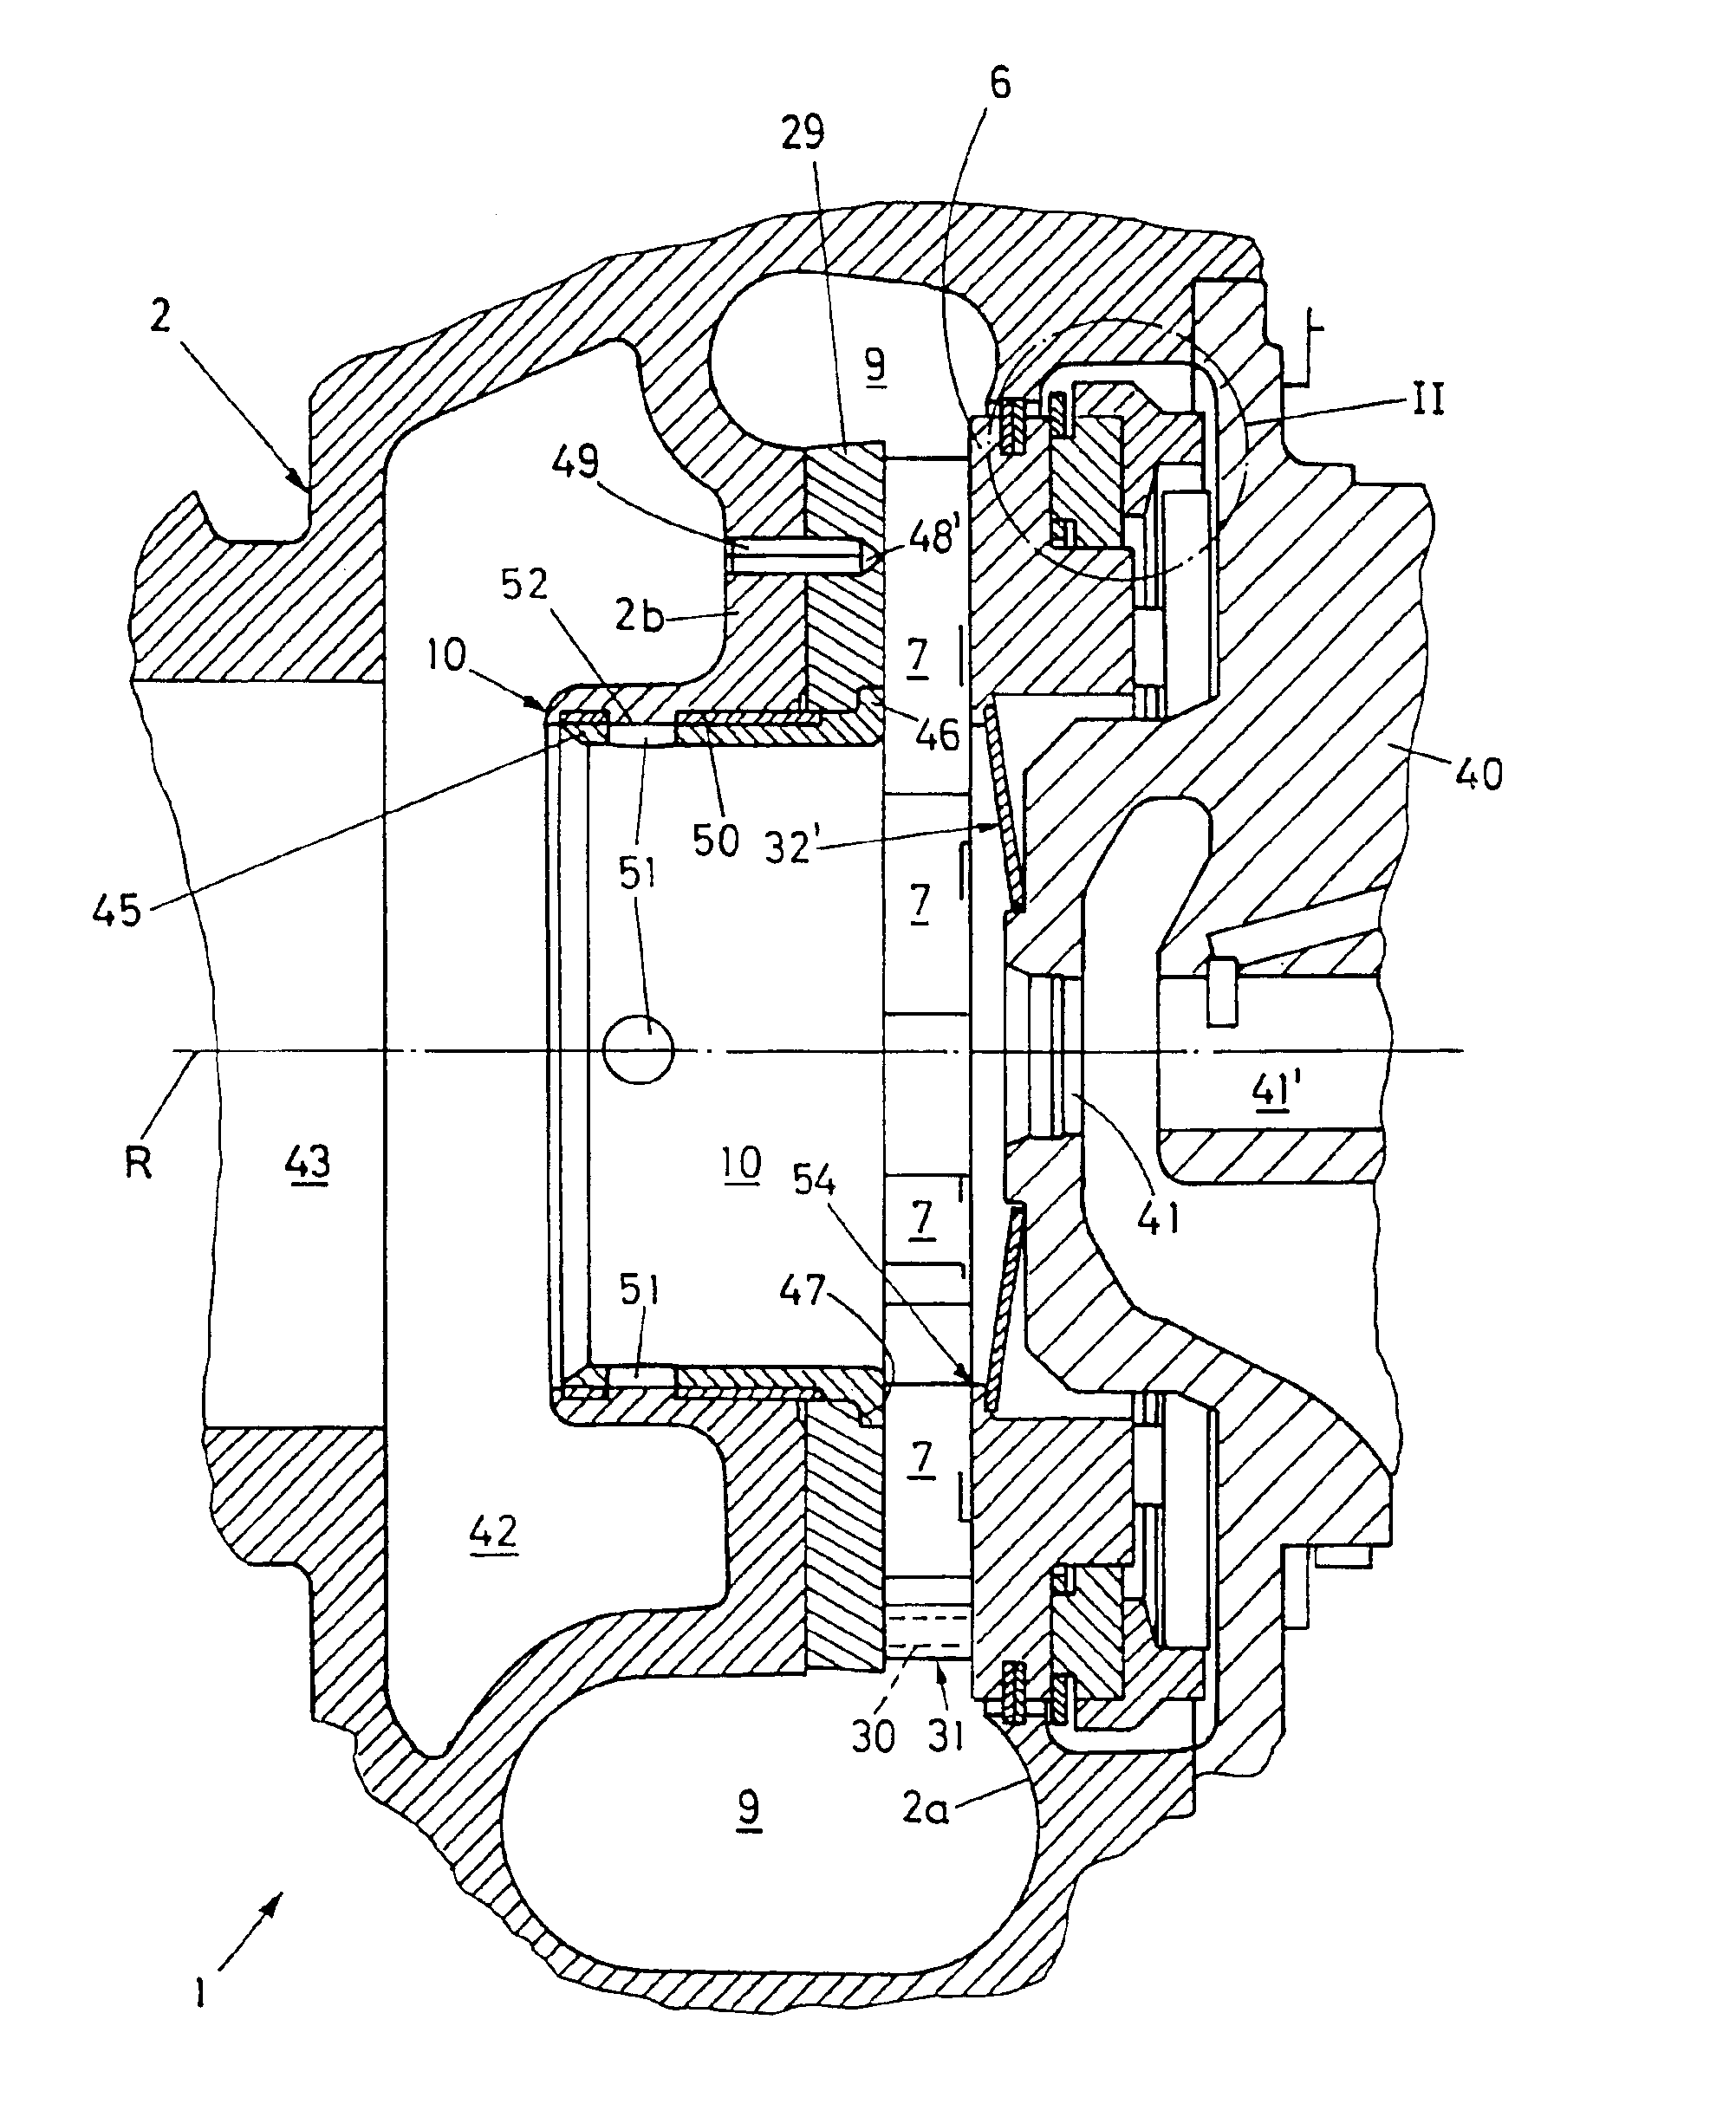 Guiding grid of variable geometry and turbocharger